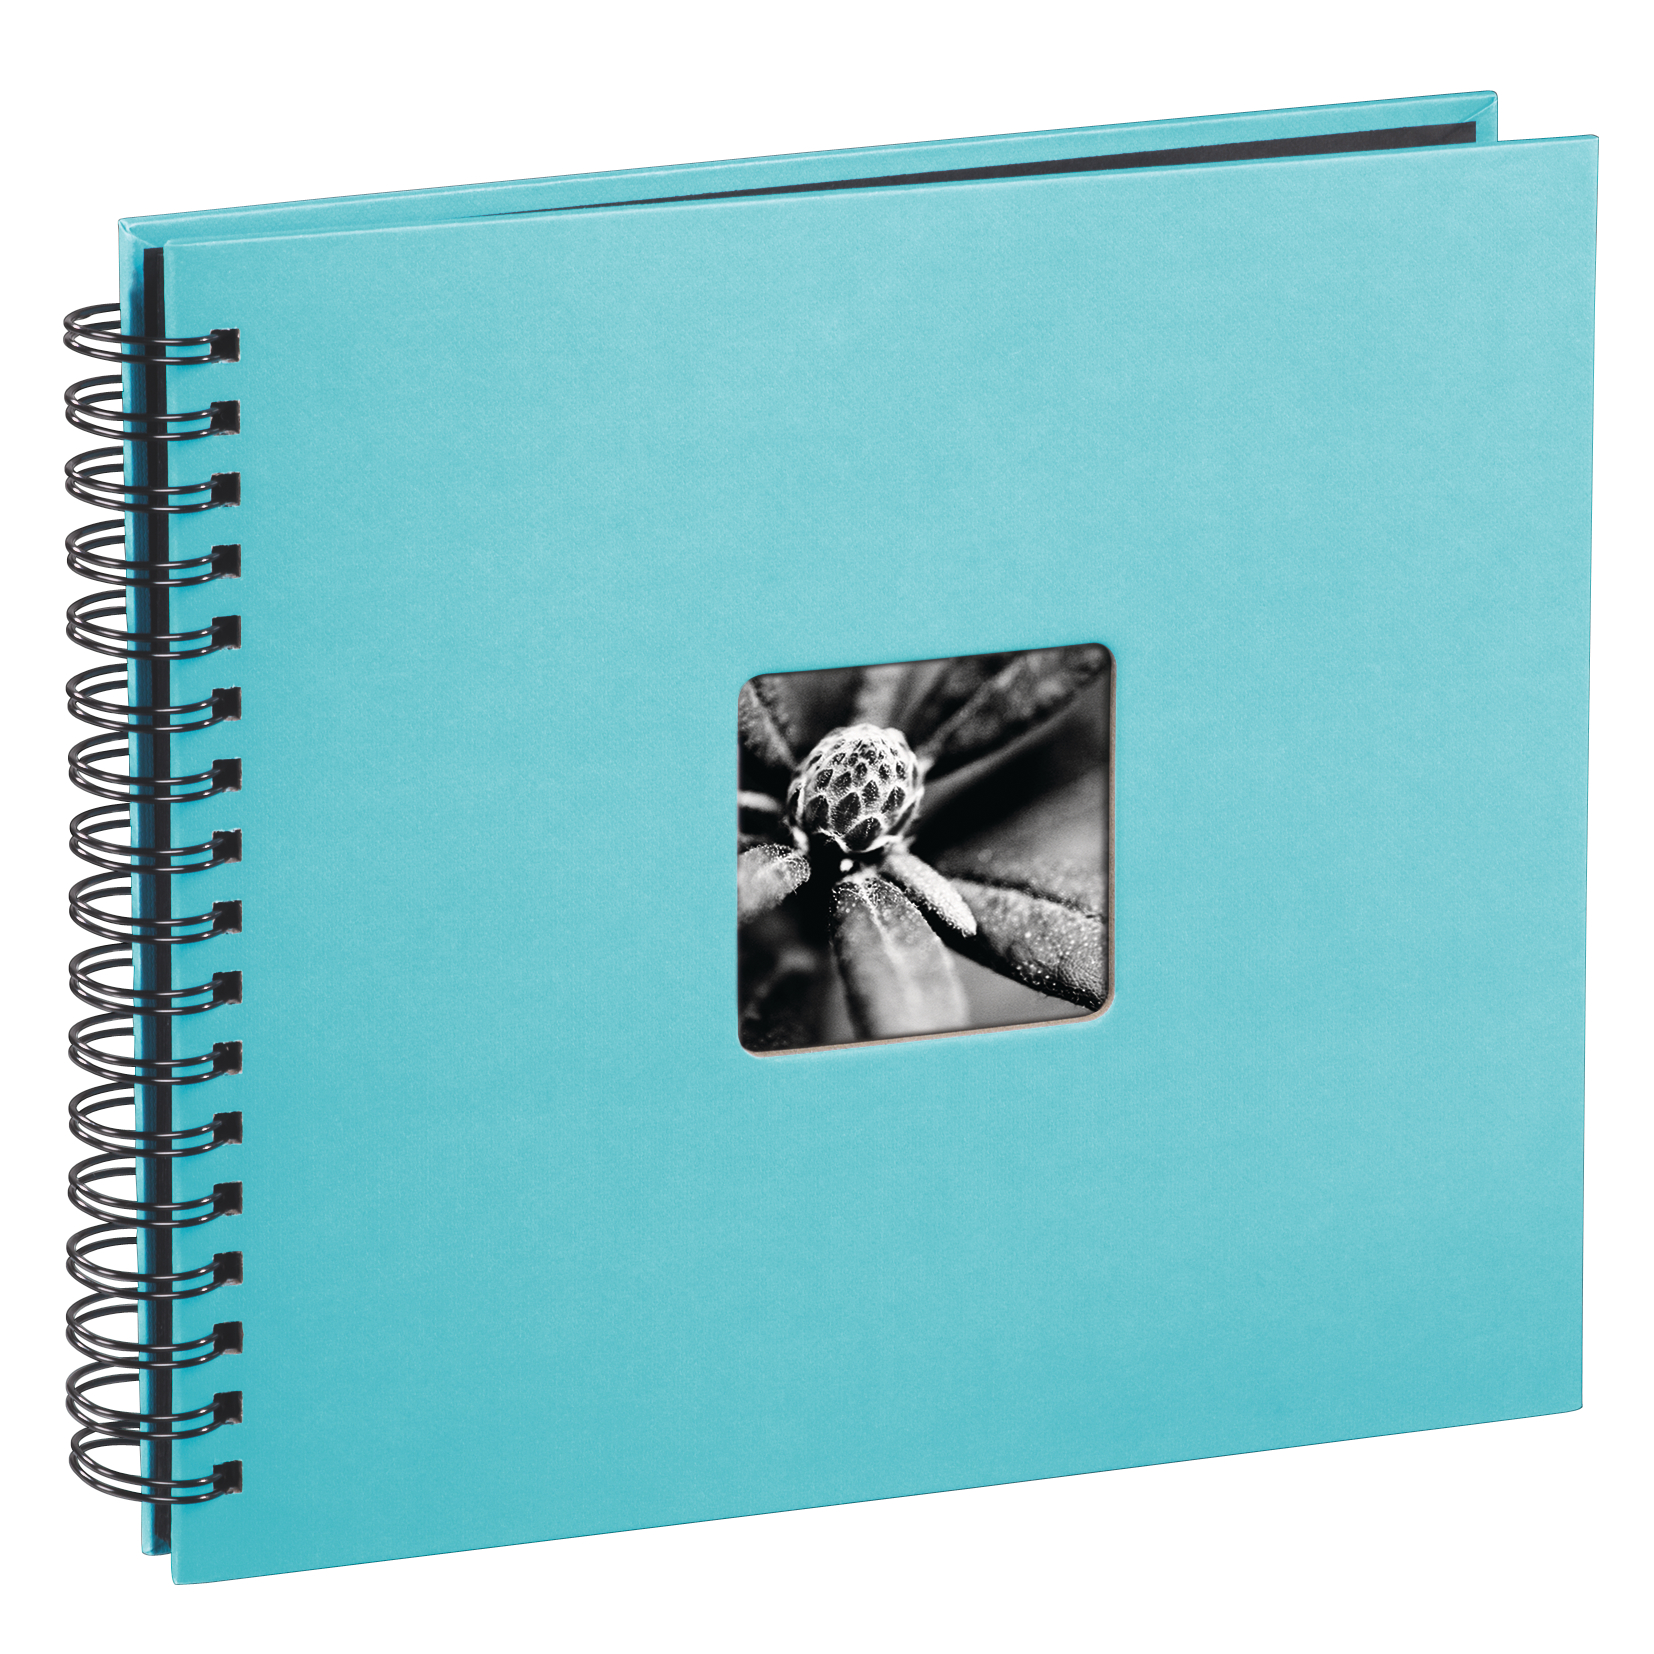 HAMA Album Fine Art 10607 360x320mm, turquoise 25 pages 360x320mm, turquoise 25 pages